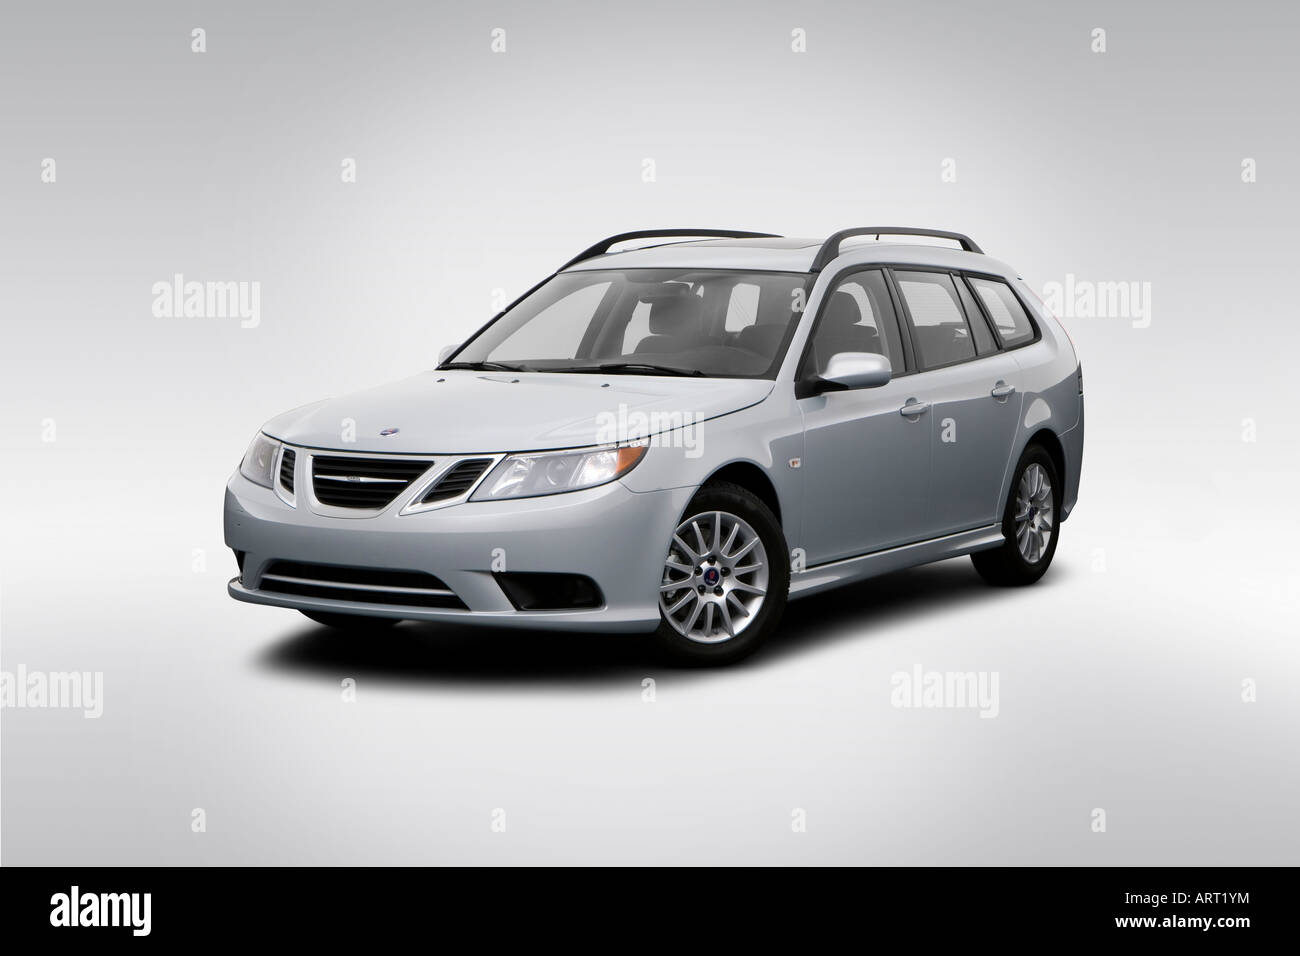 2008 Saab 9-3 Sport Combi in Silver - Front angle view Stock Photo